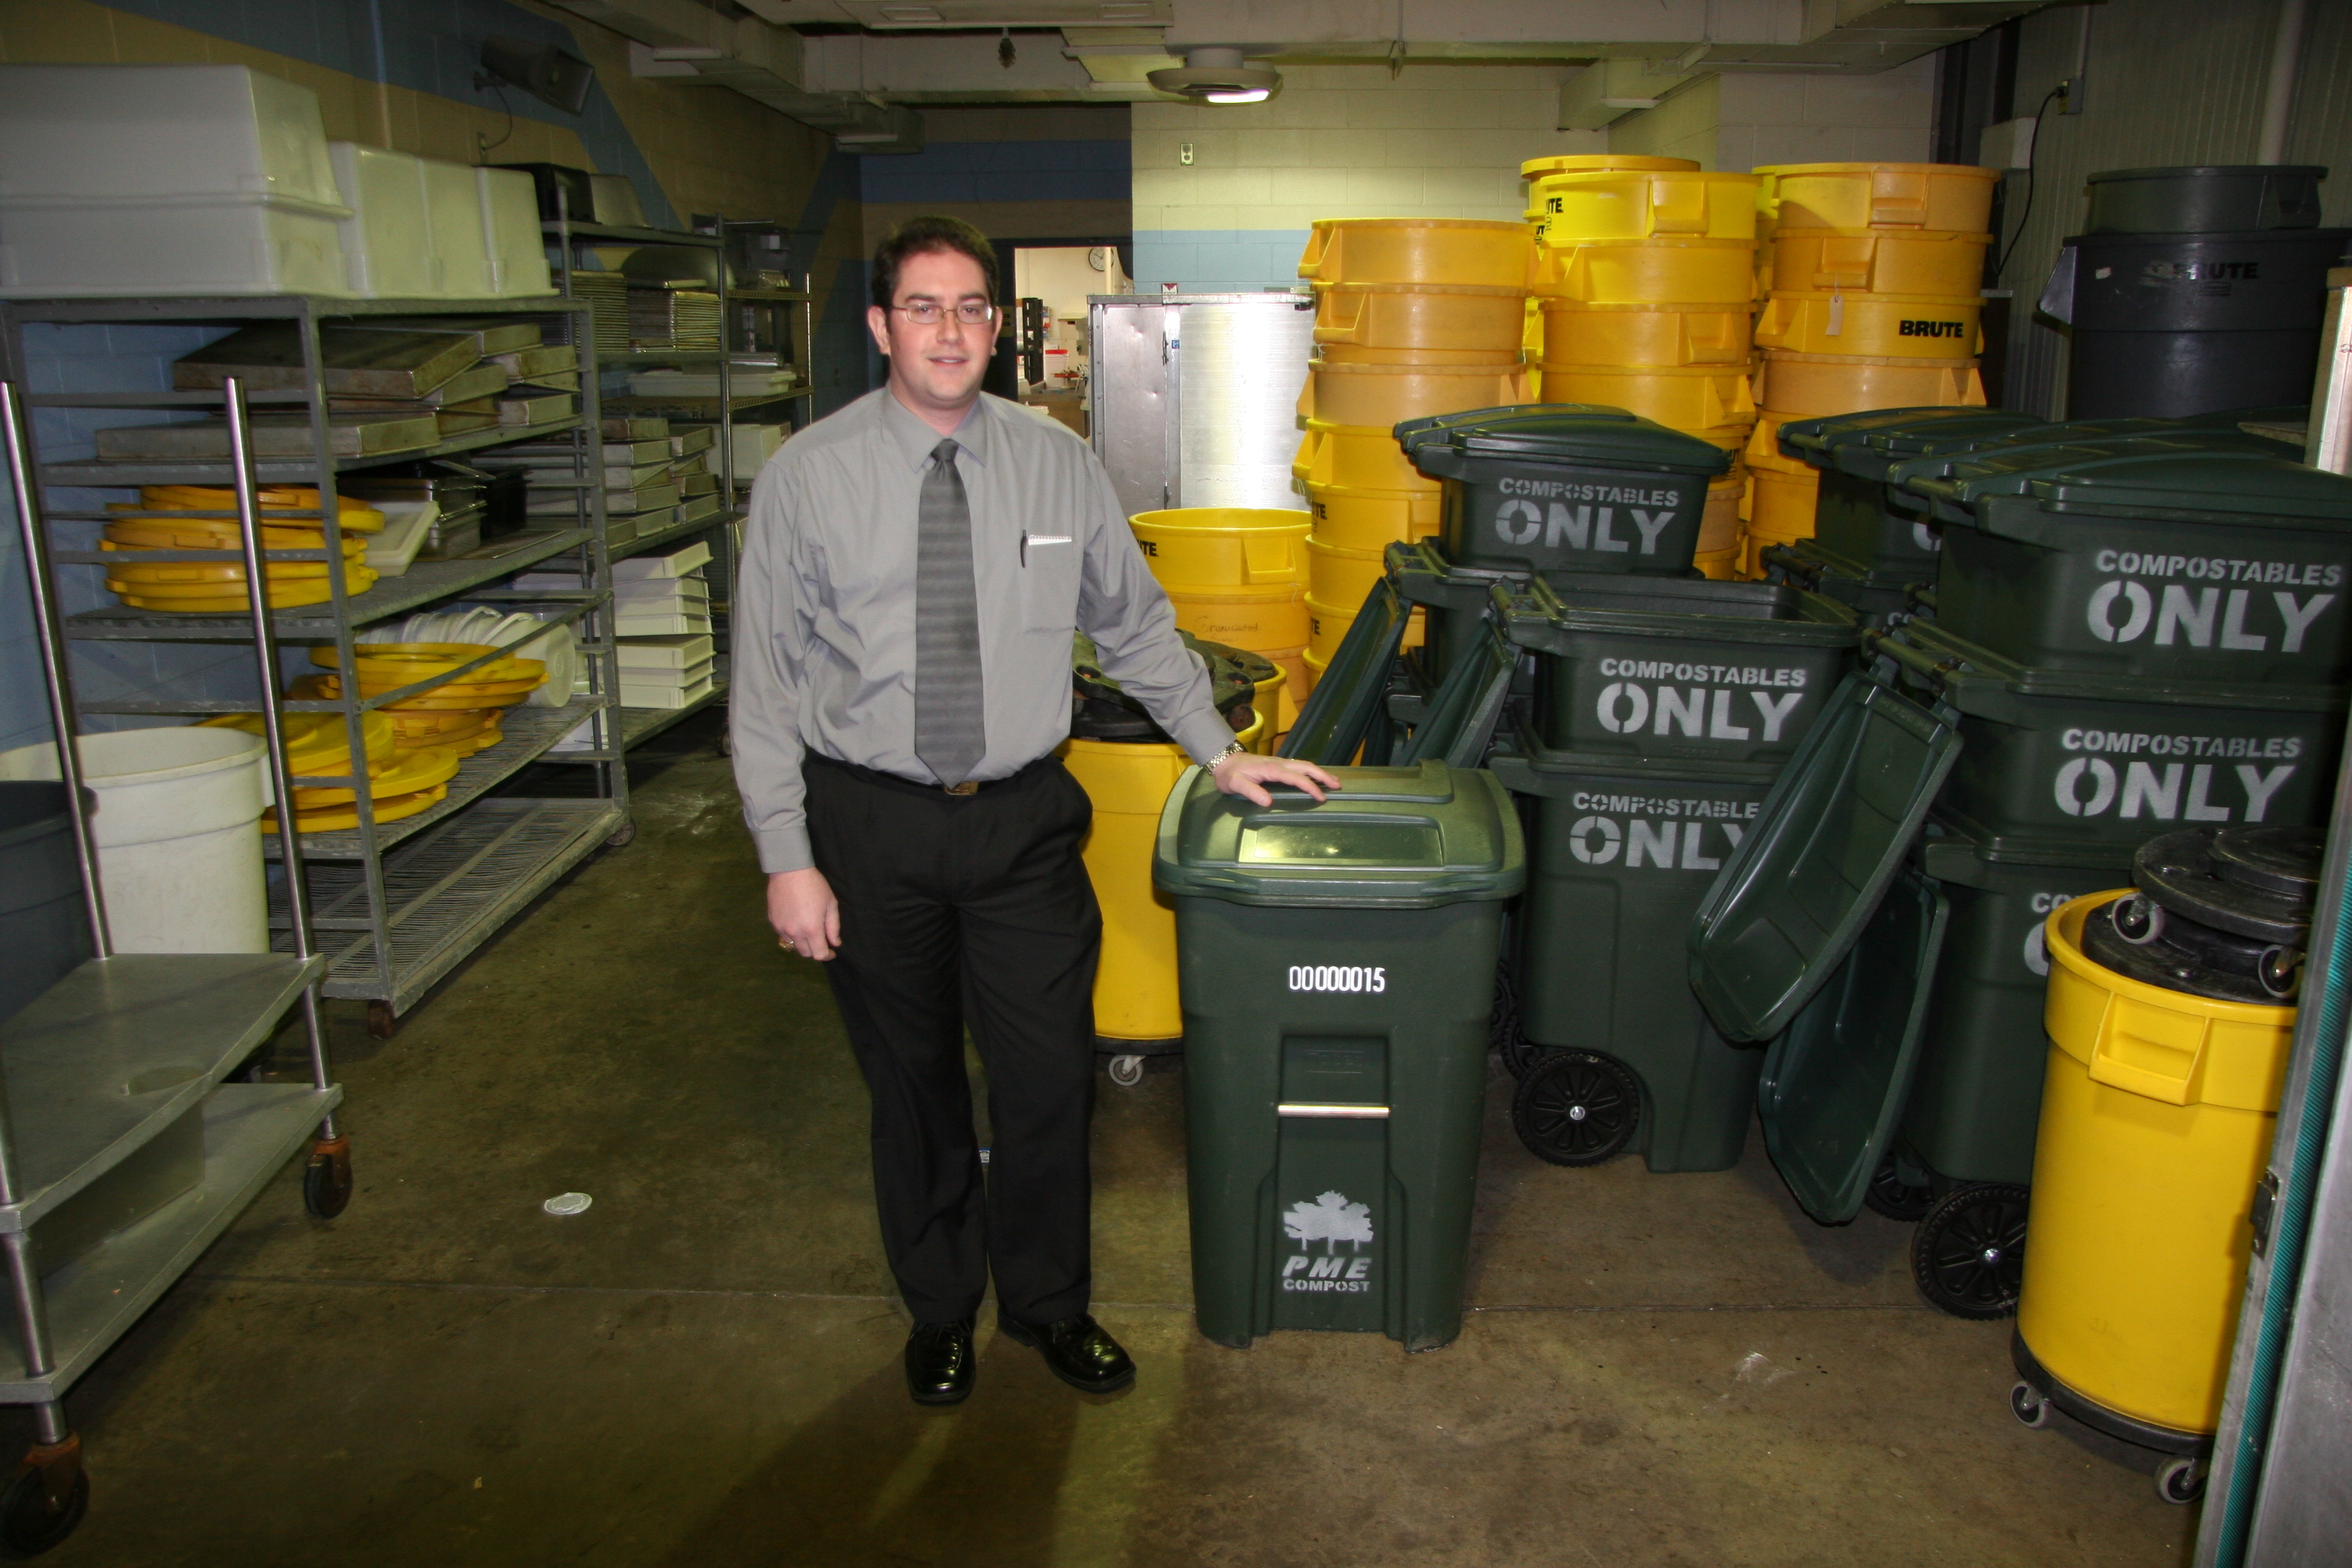 Steve Garnett, the unit manager for the Southgate Food Processing Center, stands next to a 48-gallon container used to collect food waste.